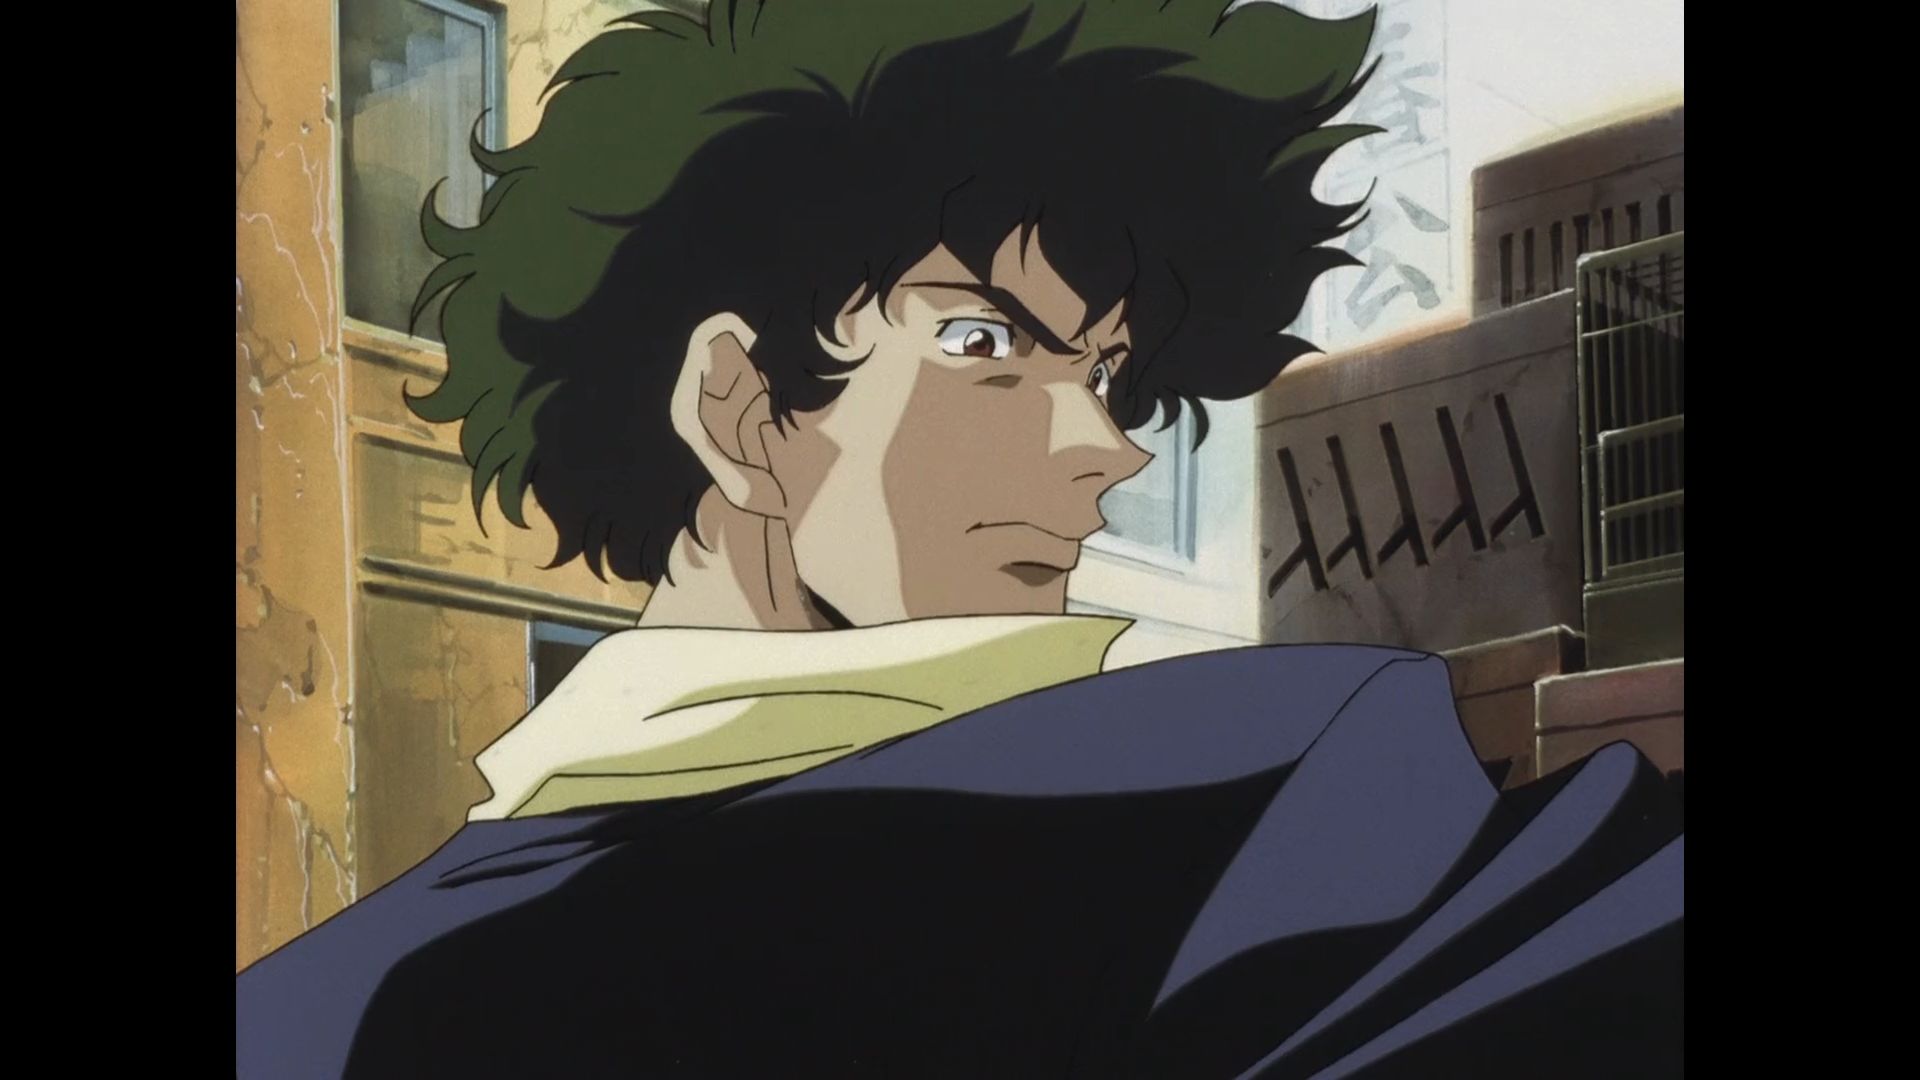 Spike Spiegel from Cowboy Bebop is one of the coolest anime boys. 